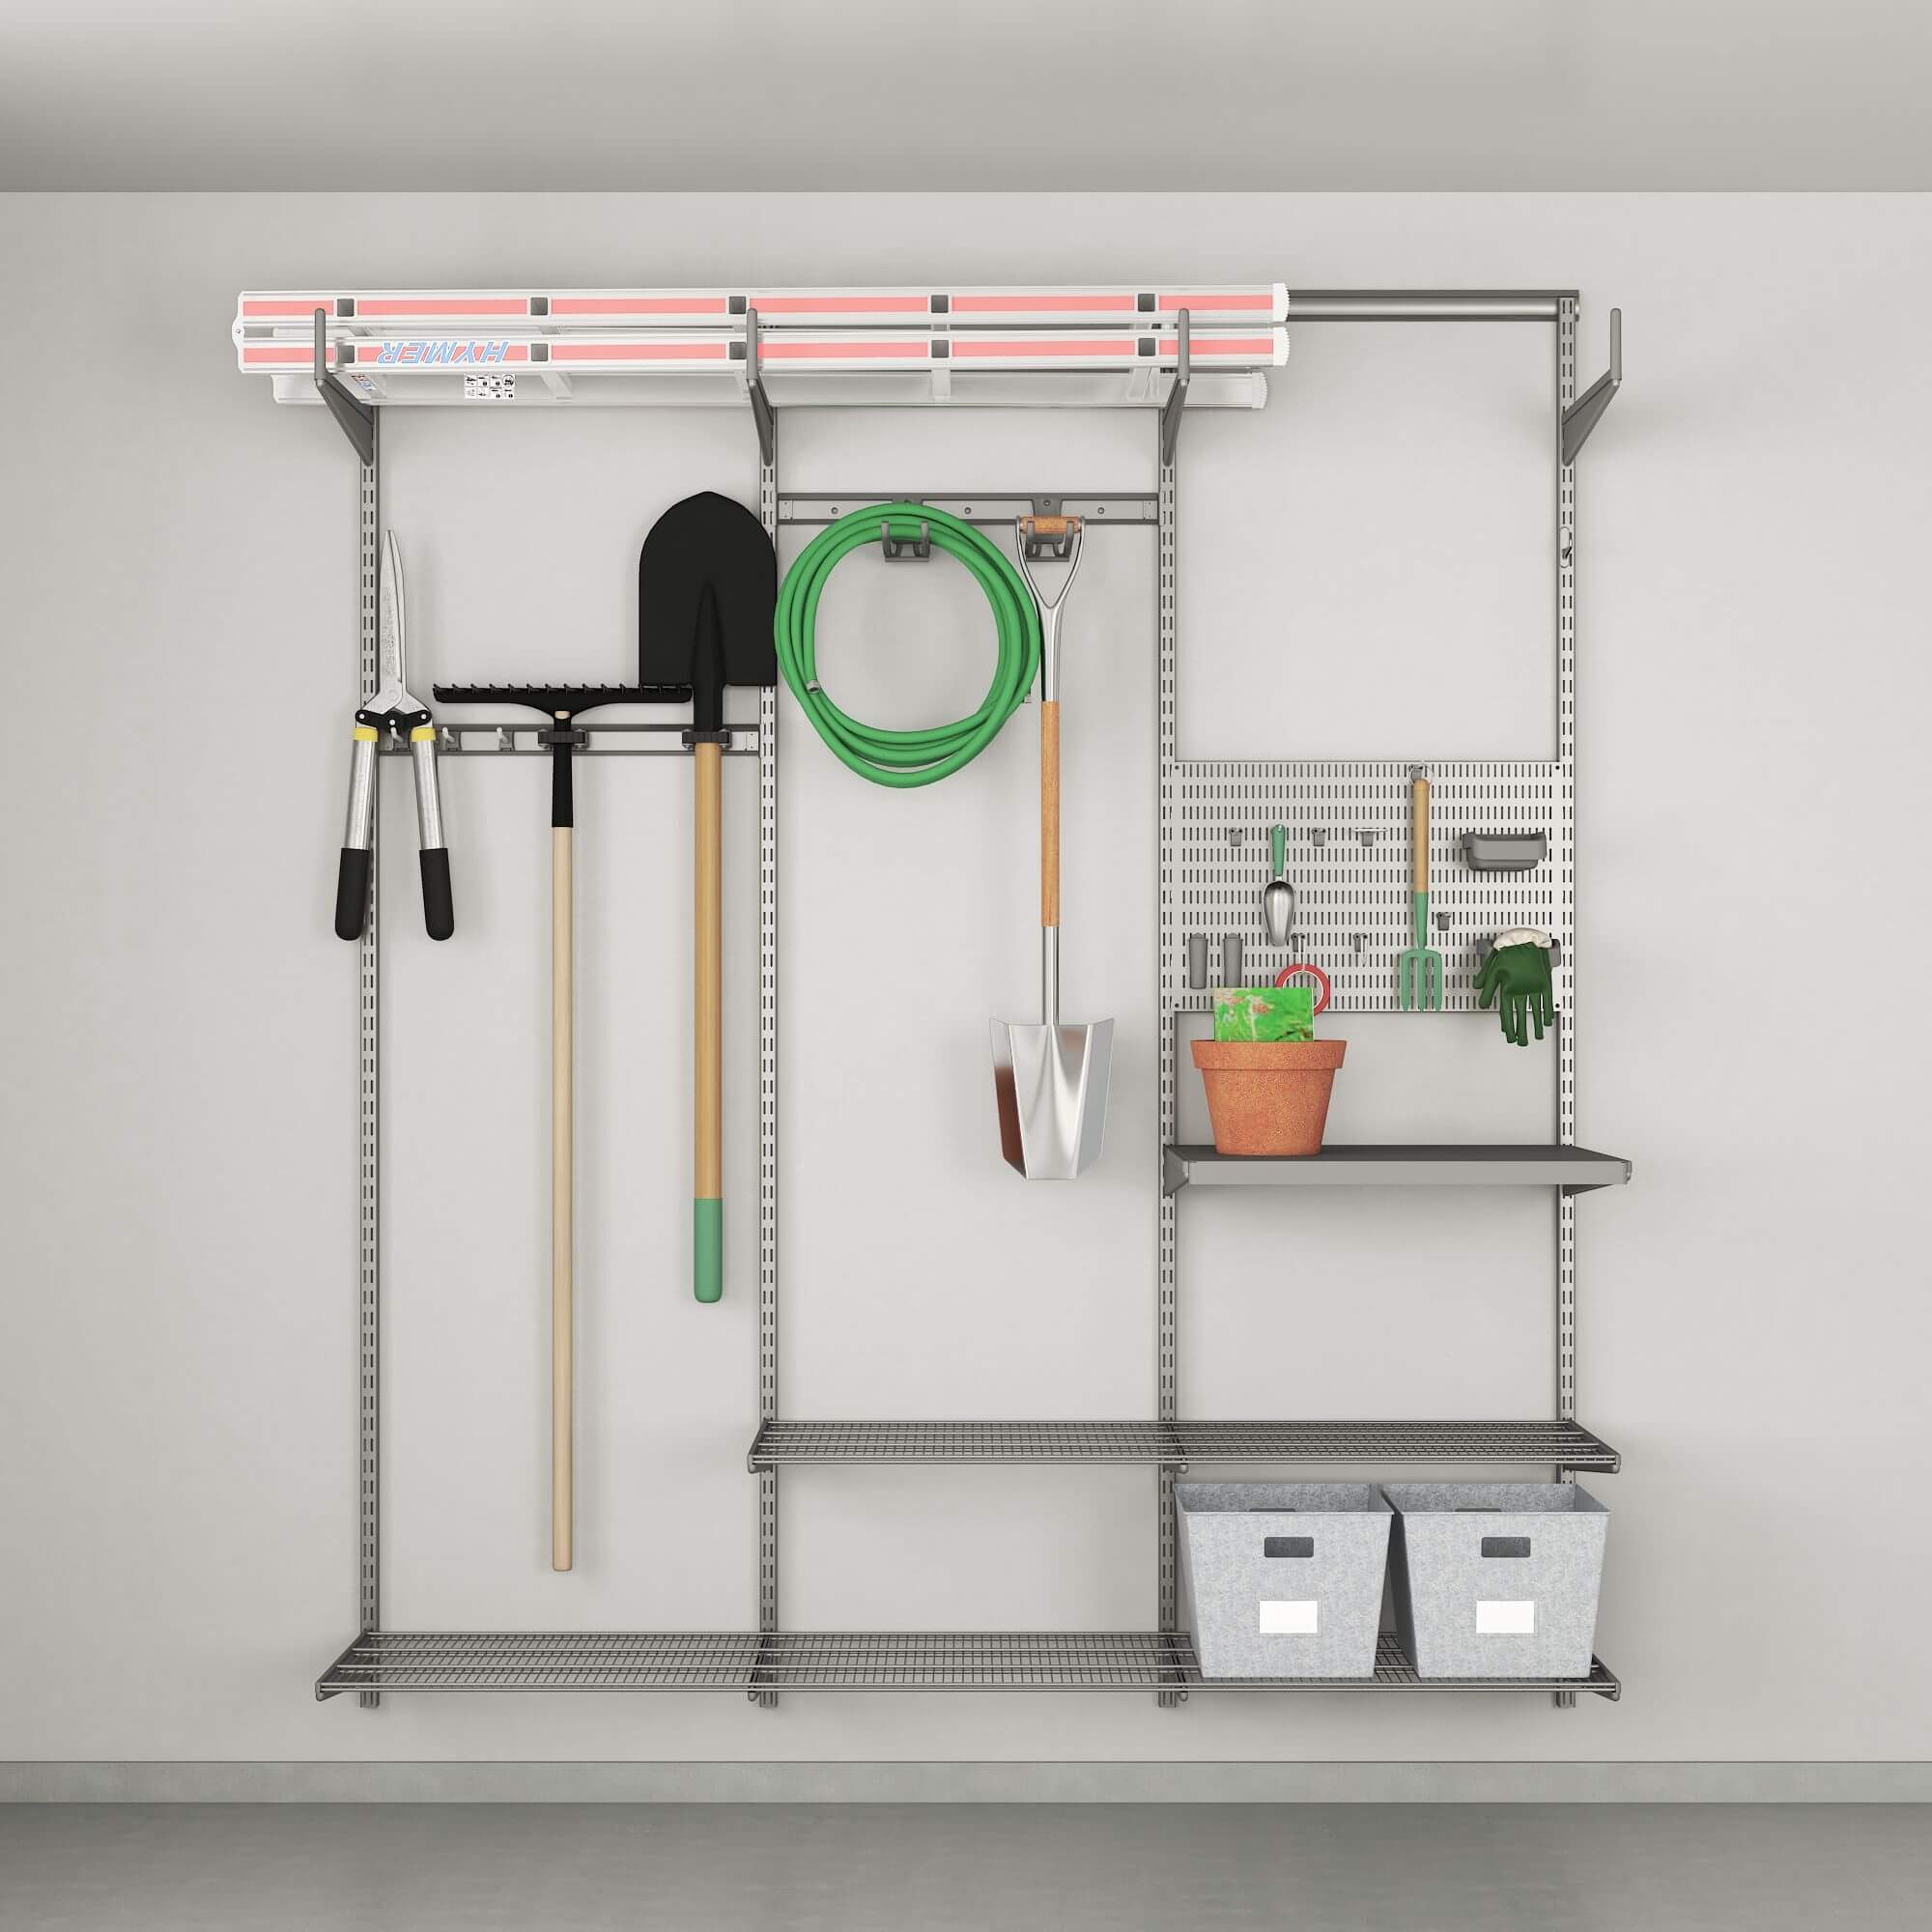 A platinum Elfa garage shelving system with storage boxes and gardening tools stored on it